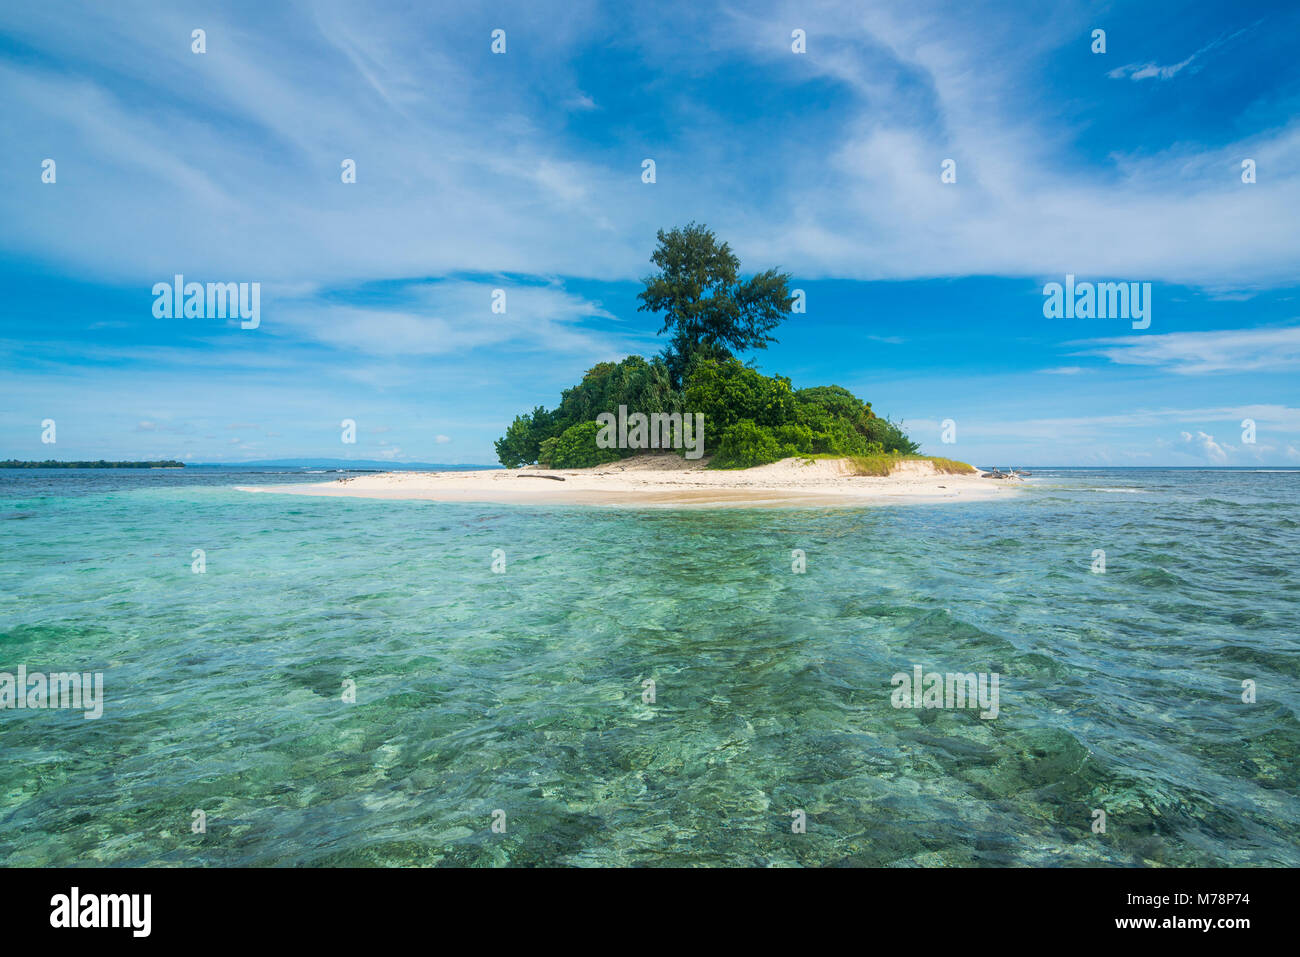 Turquoise water and white sand beach at the stunning little island of Ral off the coast of Kavieng, New Ireland, Papua New Guinea, Pacific Stock Photo